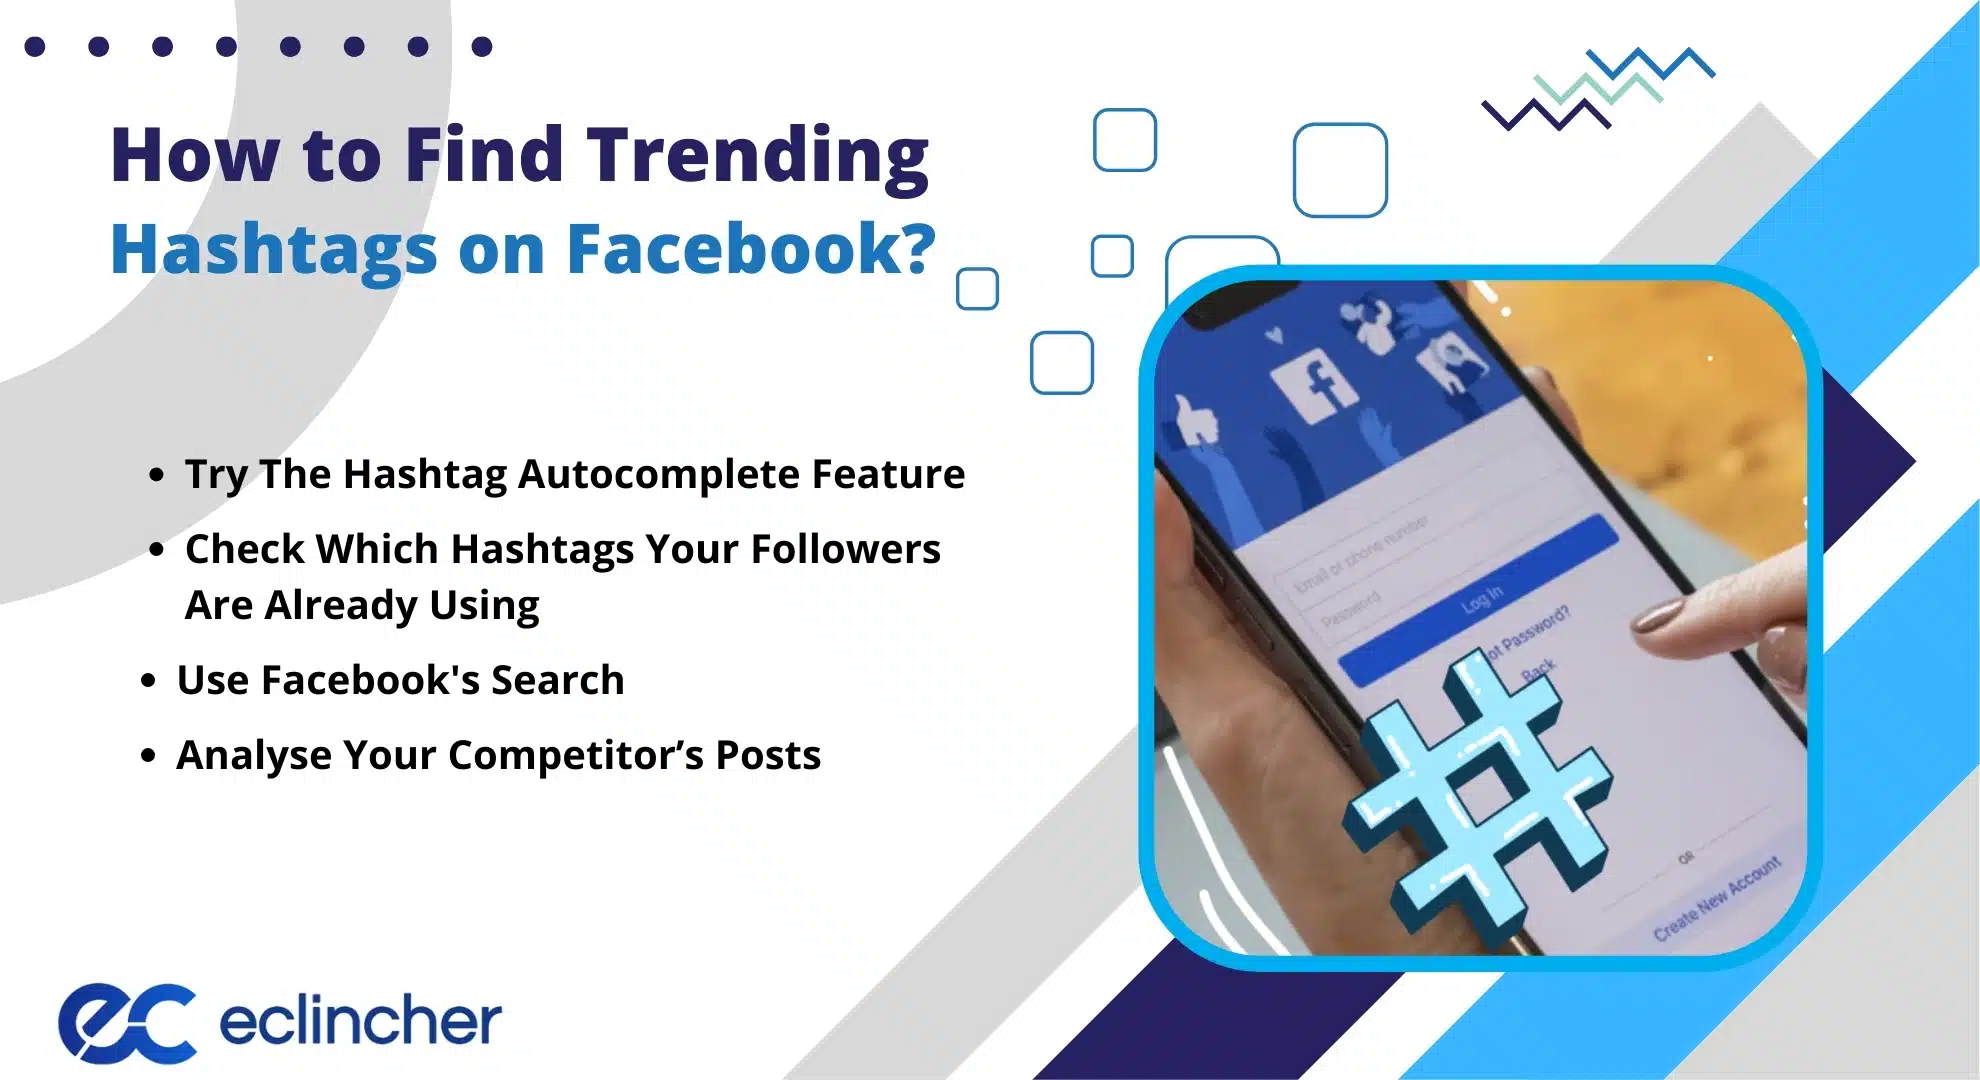 How to Find Trending Hashtags on Facebook